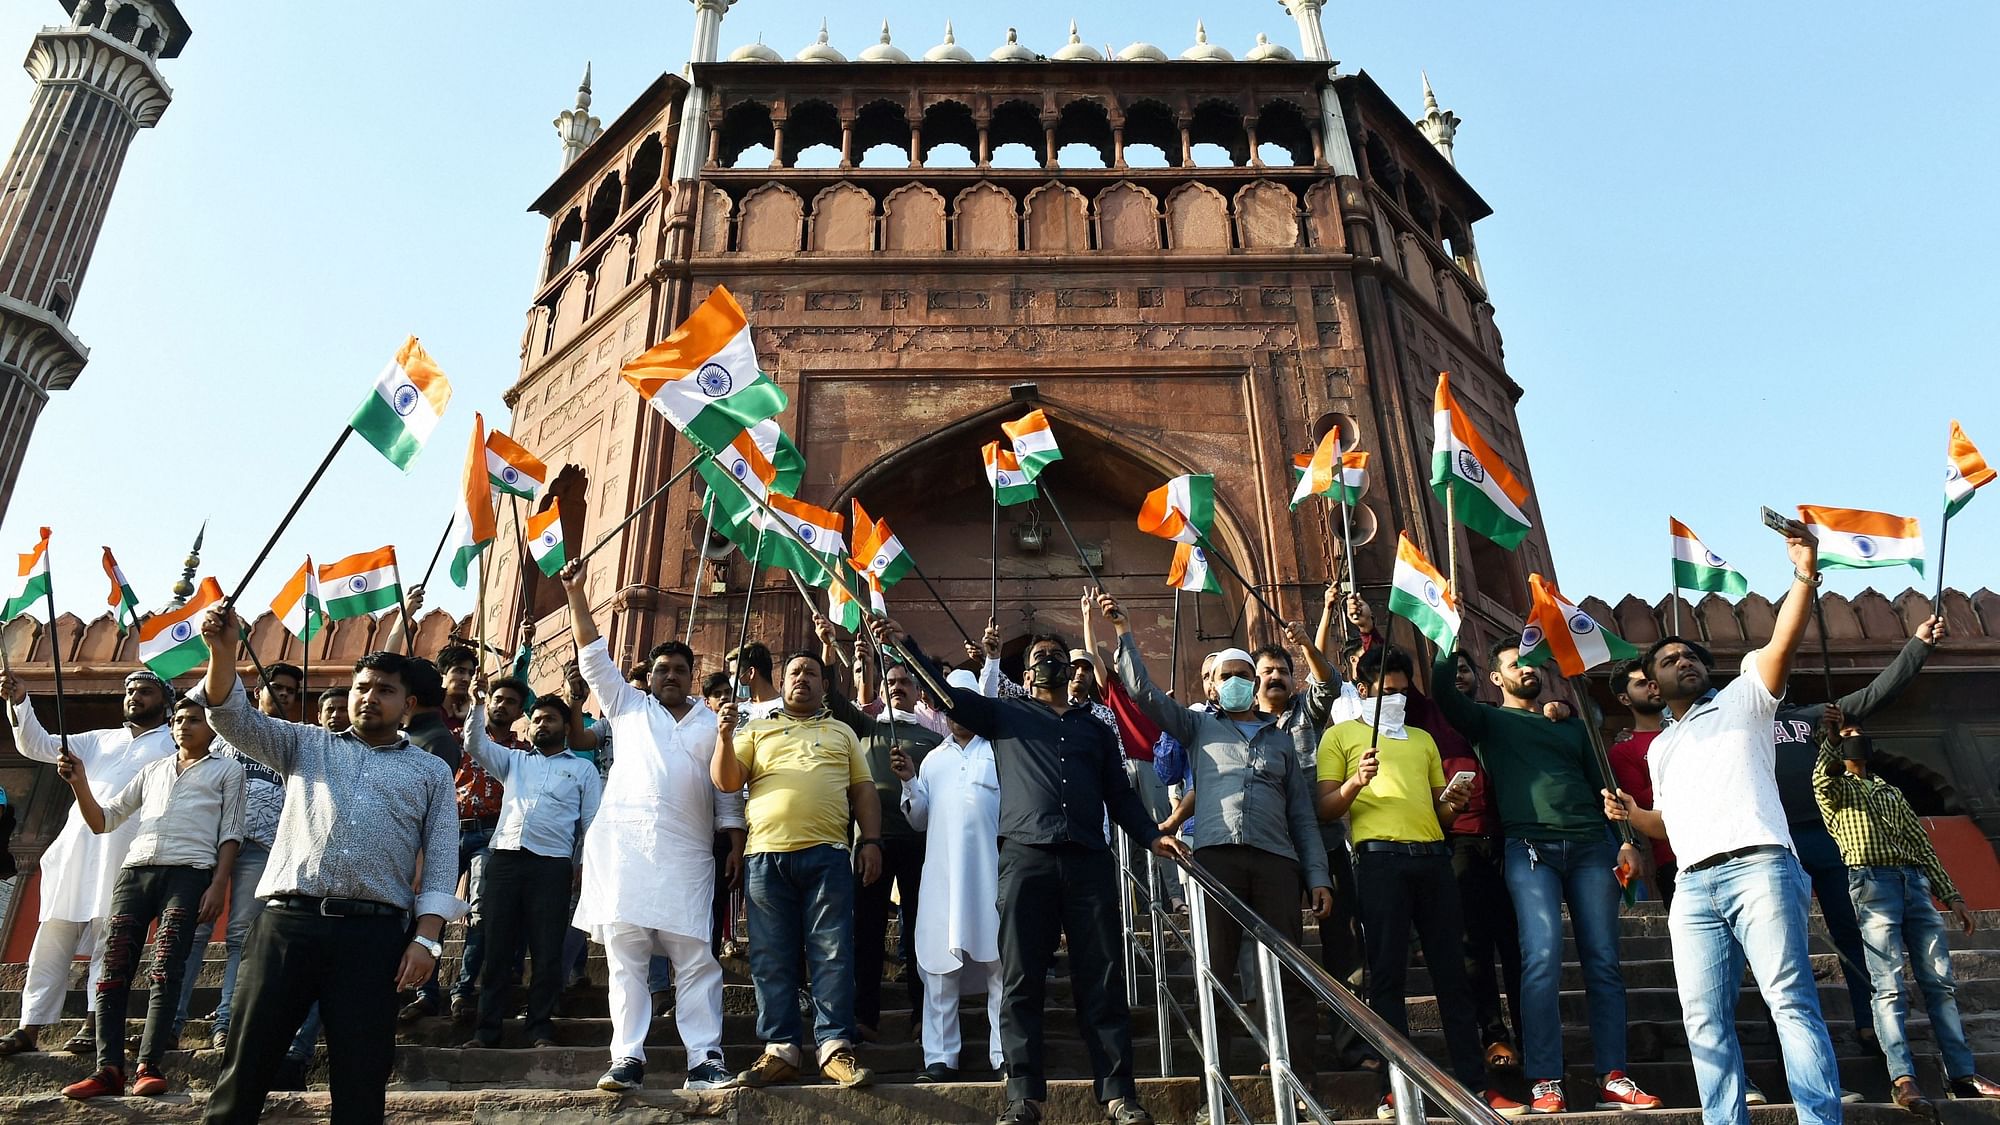 People hold the national flag and gather at Jama Masjid in Delhi during Janta Curfew in the wake of coronavirus.